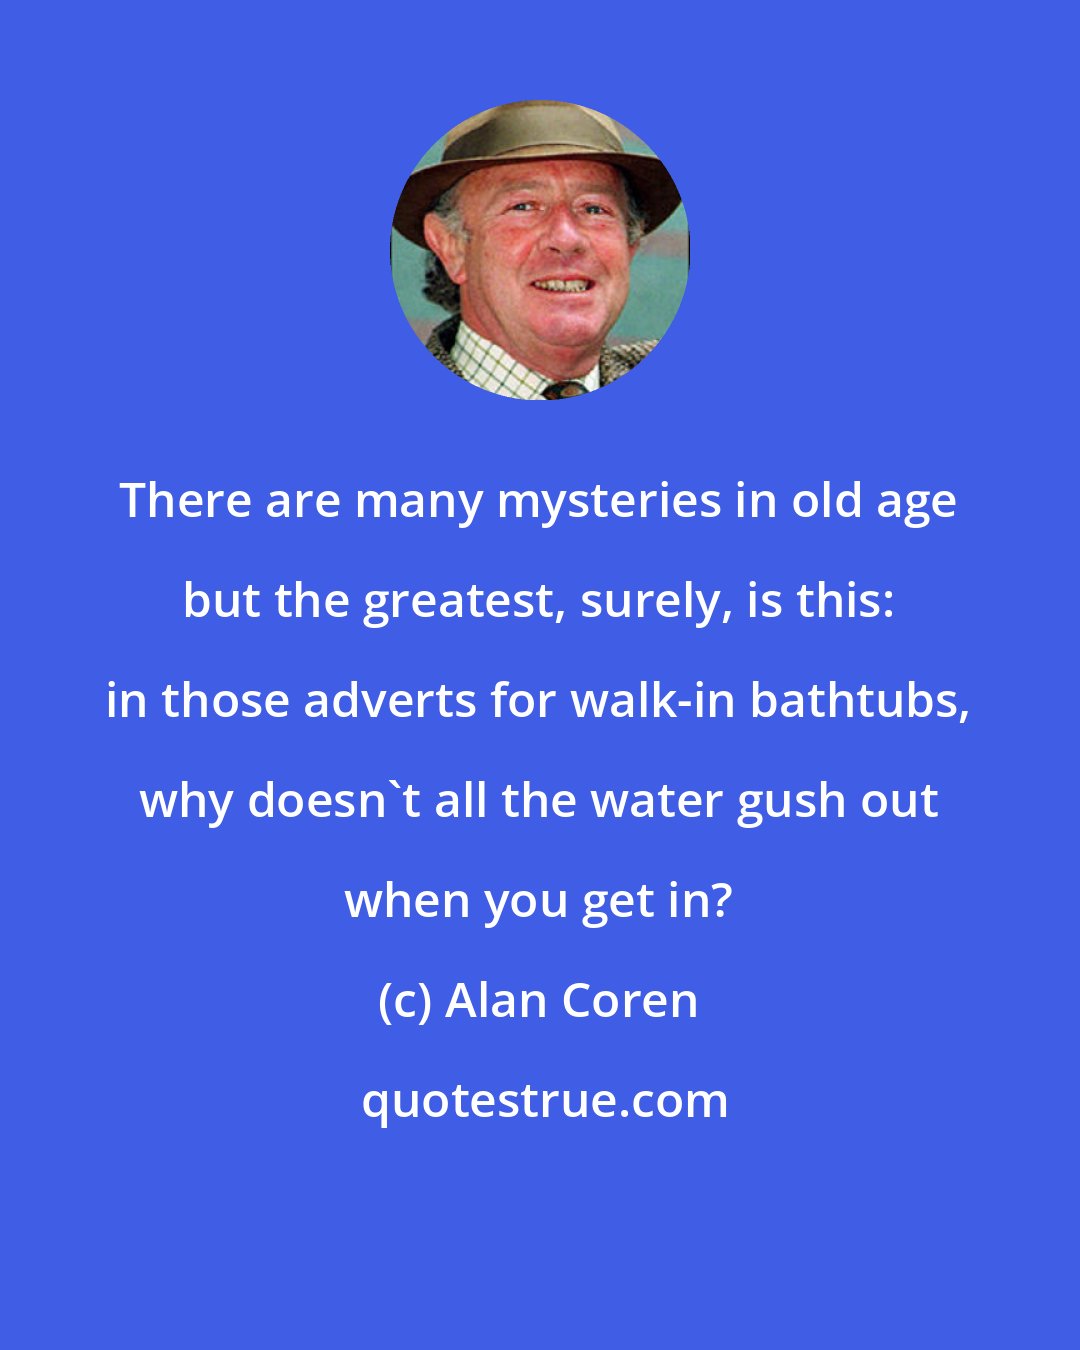 Alan Coren: There are many mysteries in old age but the greatest, surely, is this: in those adverts for walk-in bathtubs, why doesn't all the water gush out when you get in?